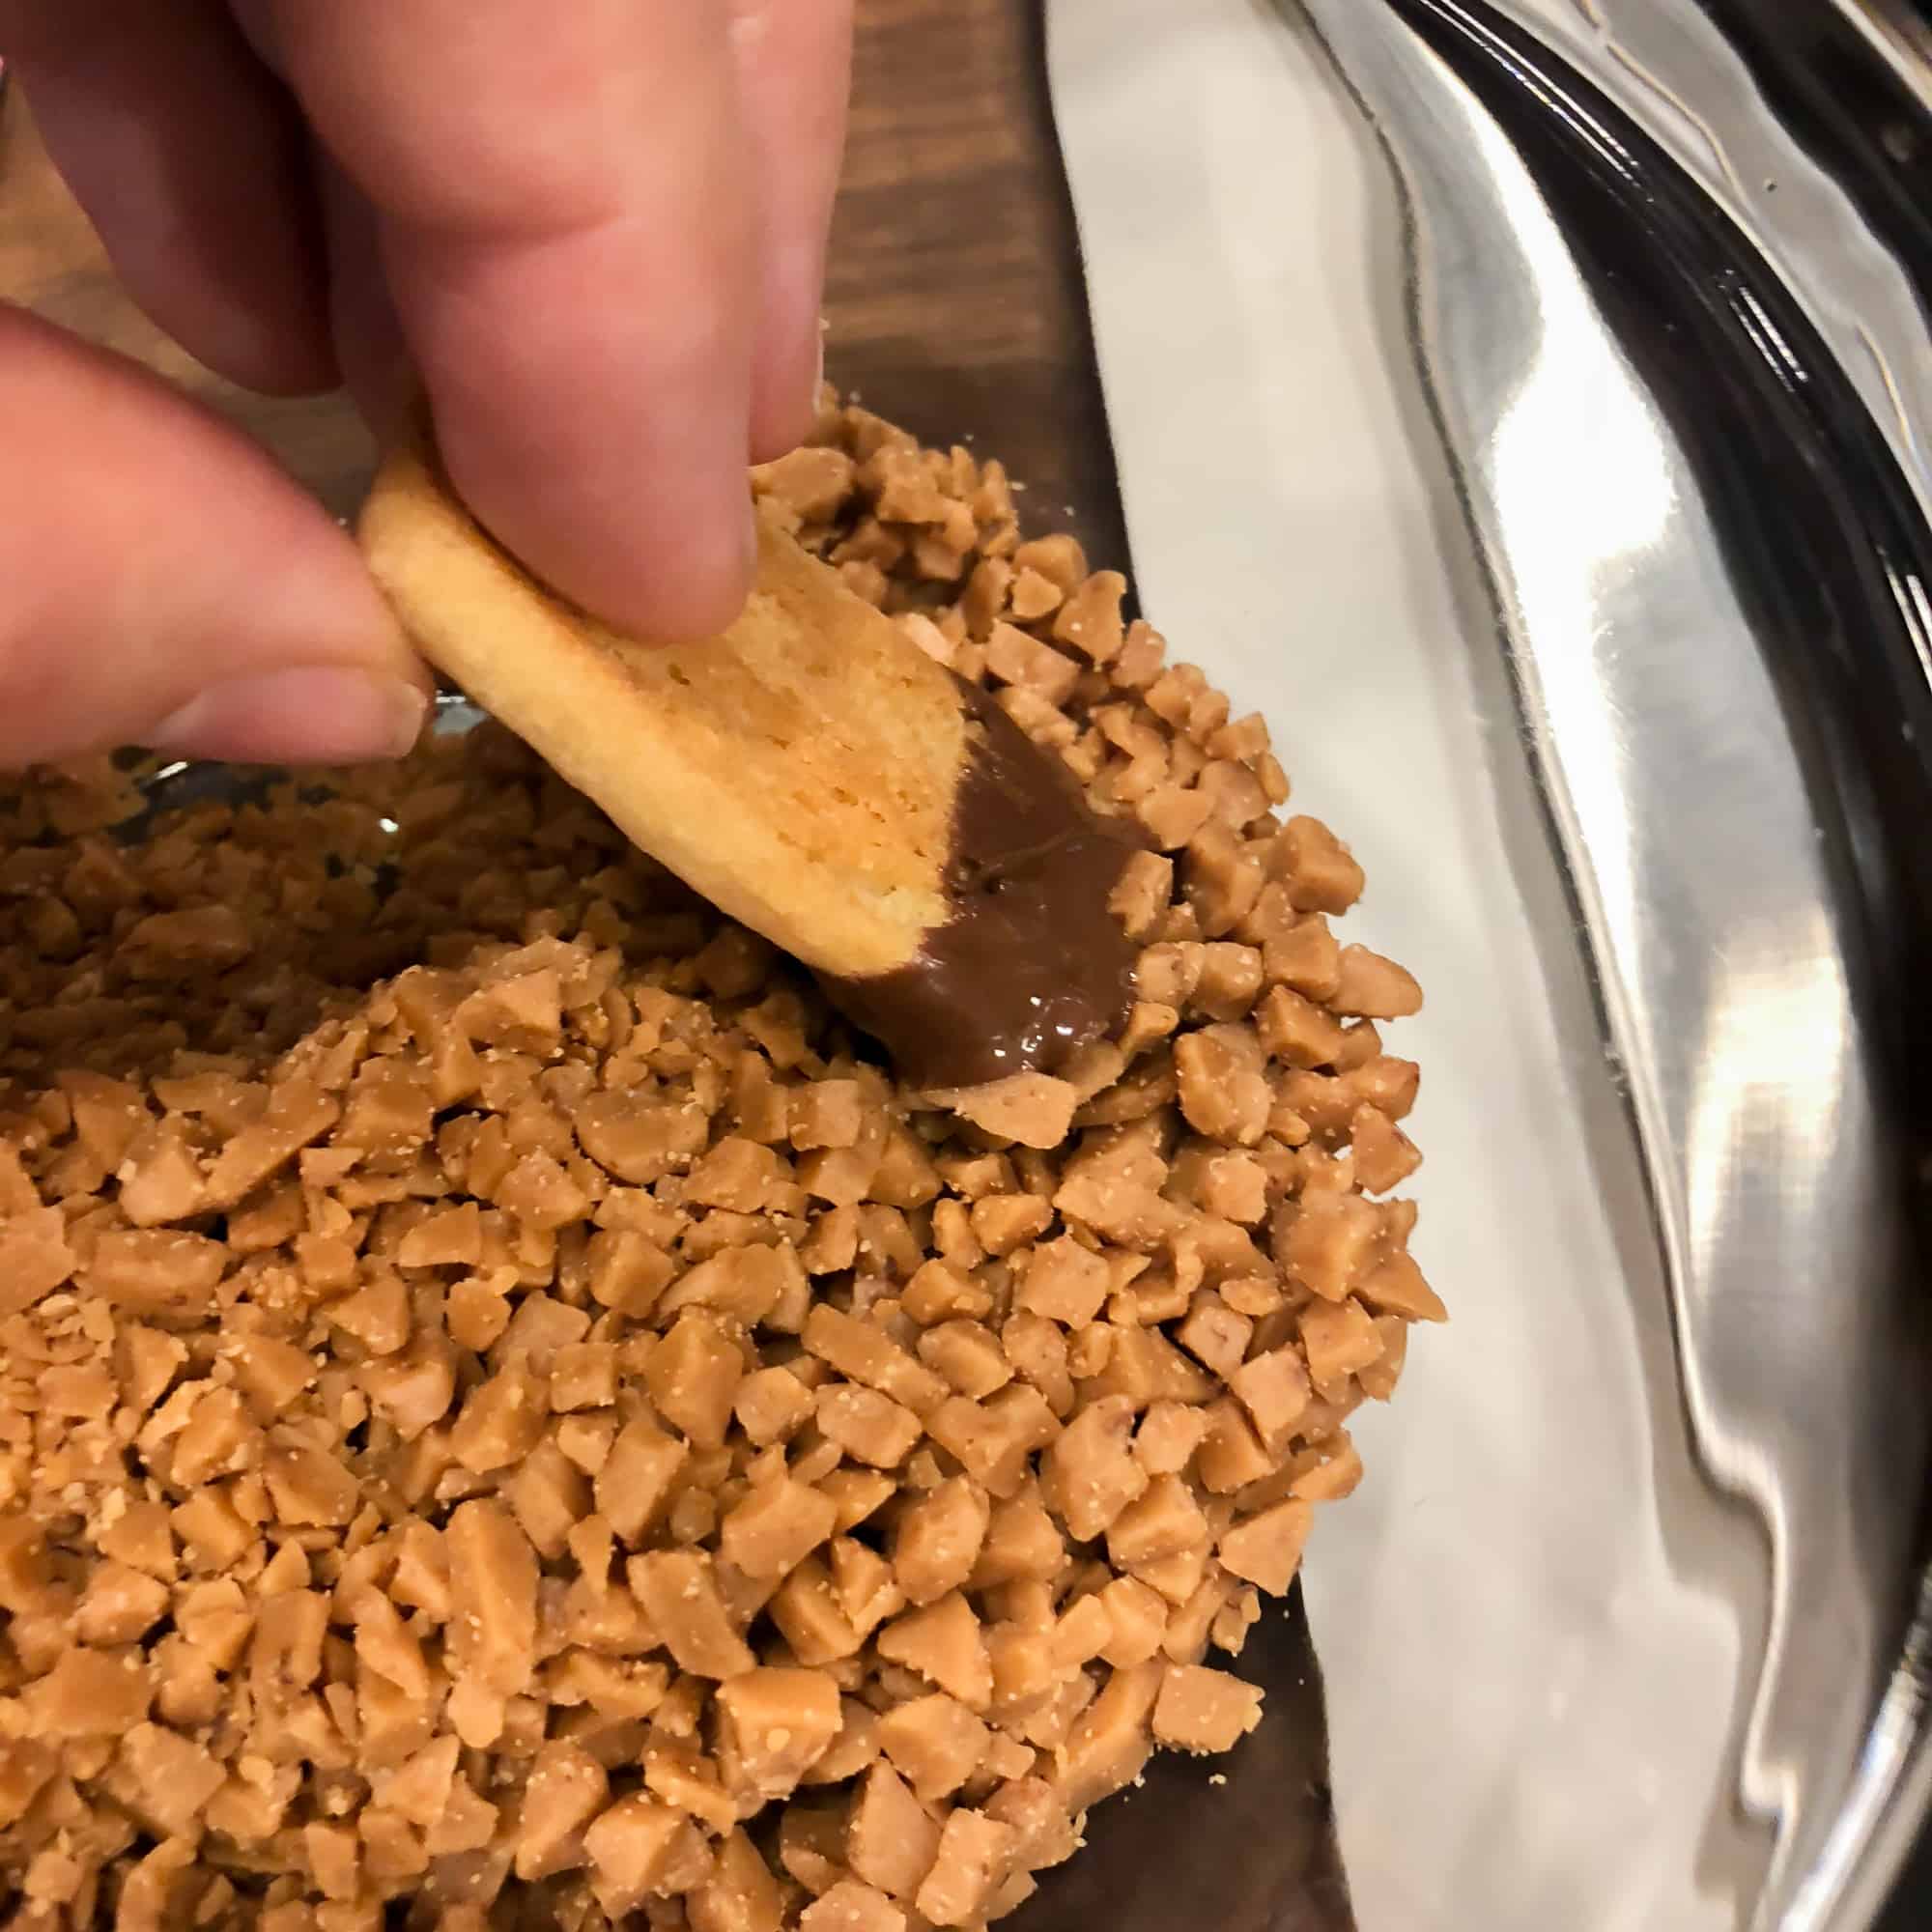 Right after the cookie is dipped in melted chocolate, dip it right into some skor butter crunch bits.